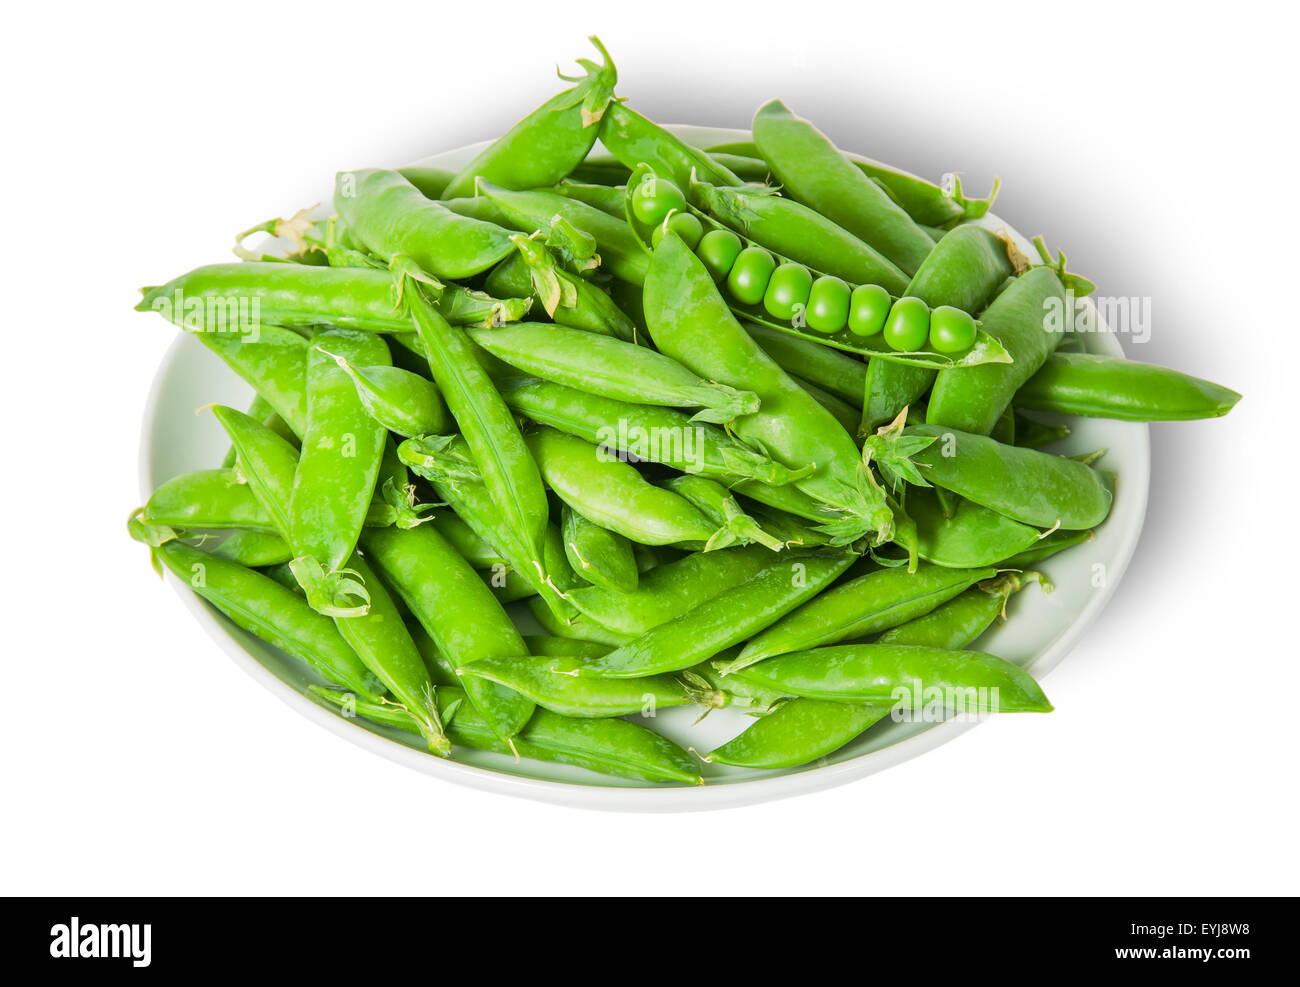 Big pile opening and closing pea pods on white plate isolated on white background Stock Photo